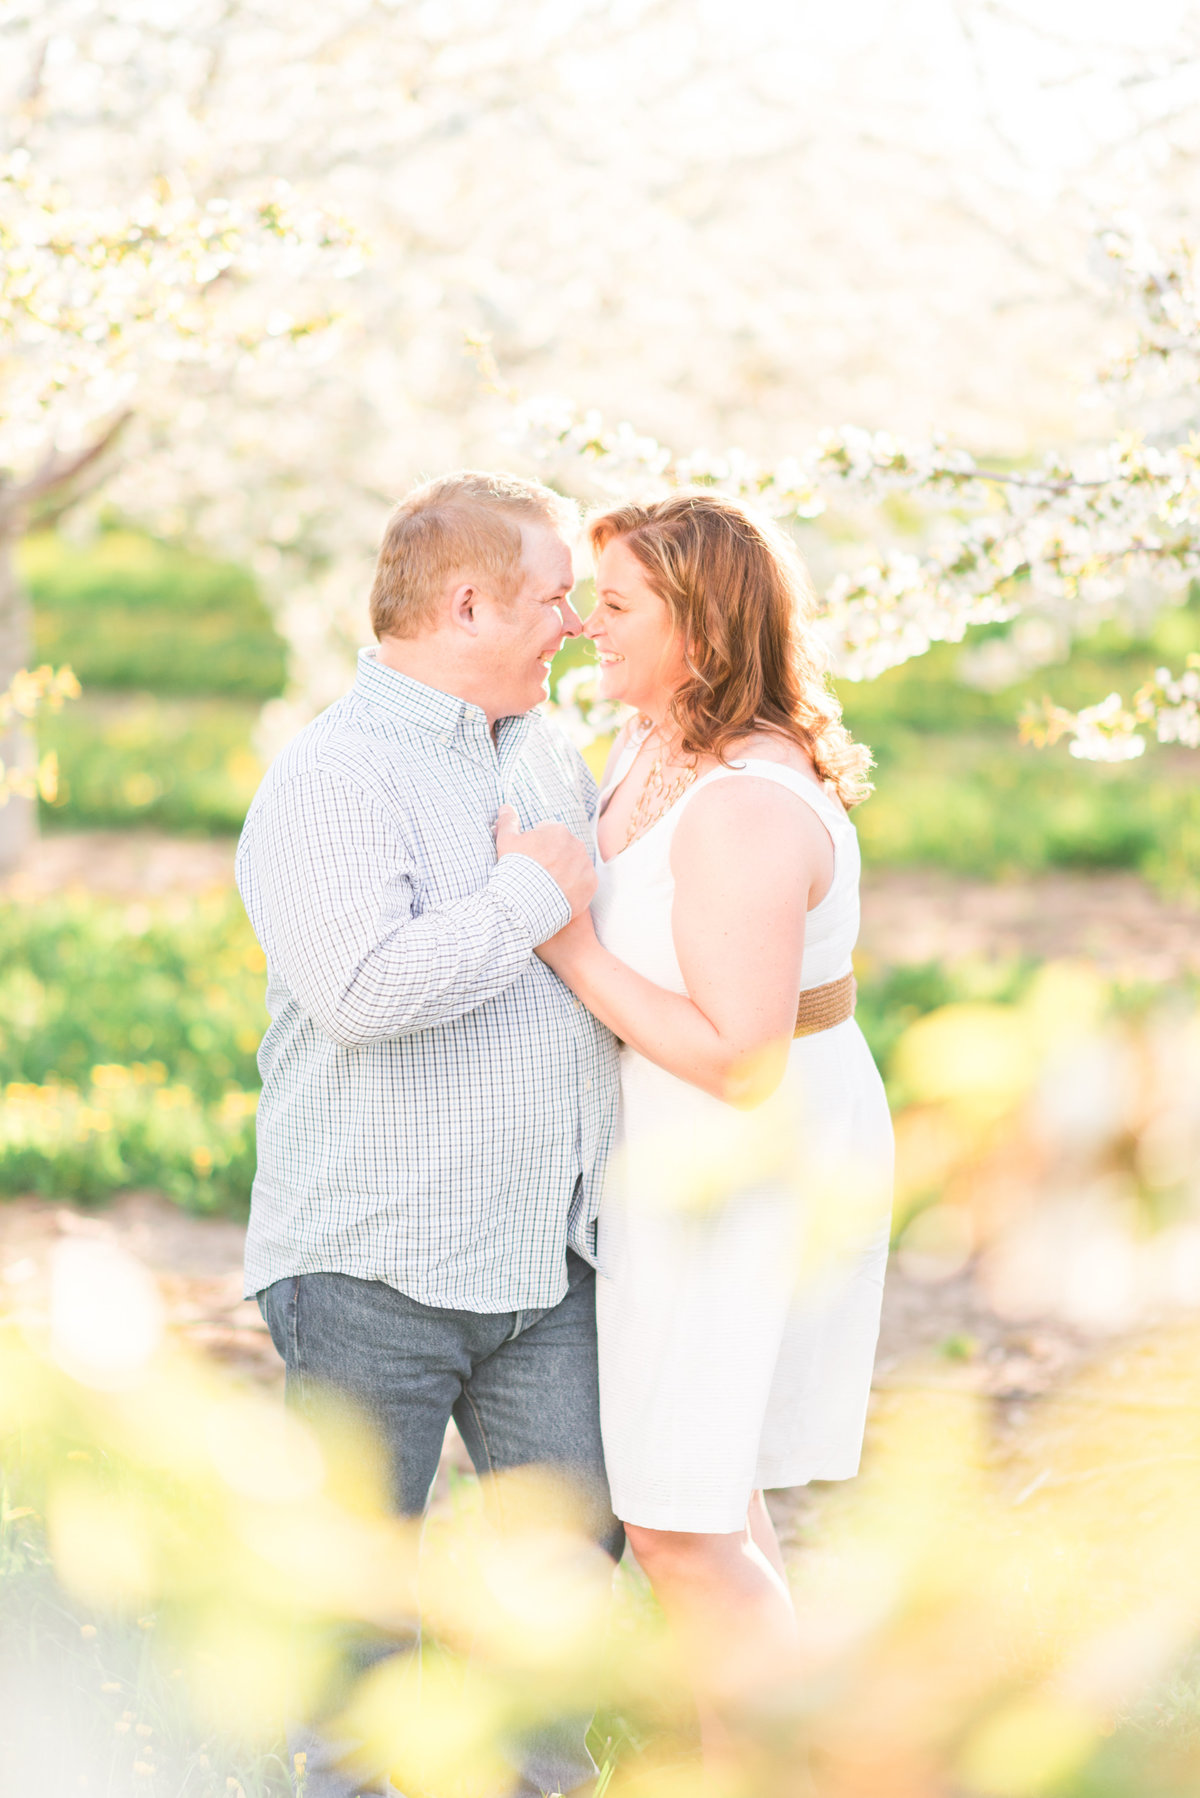 cherry blossom orchard engagement pictures in northern michigan